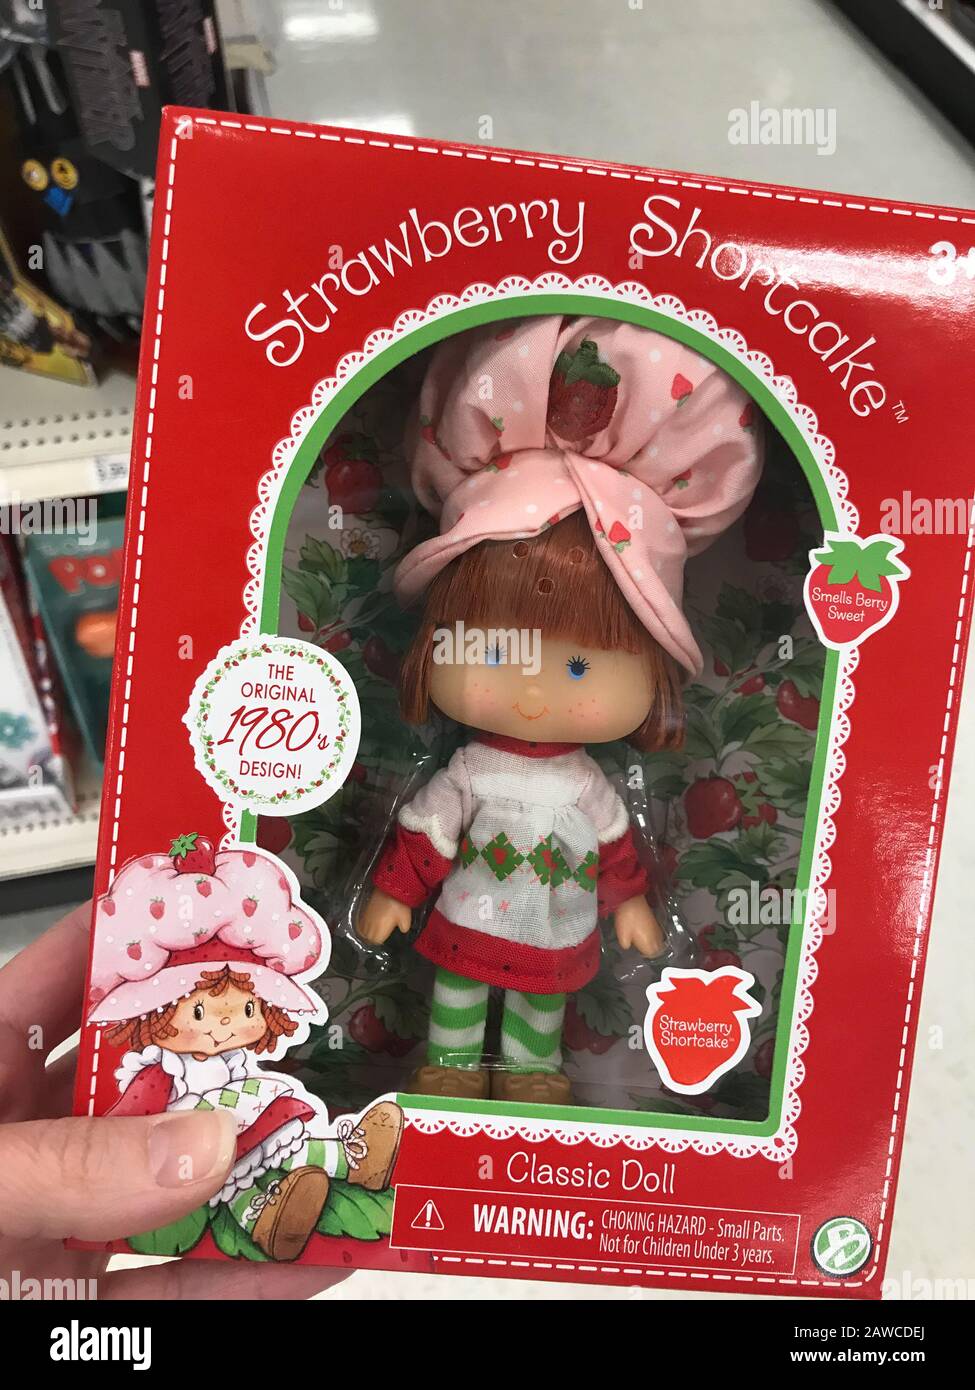 EDISON, NEW JERSEY / USA - June 22, 2018: A Strawberry Shortcake Doll, back from the 1980s, on sale at a local Target store; illustrative editorial Stock Photo